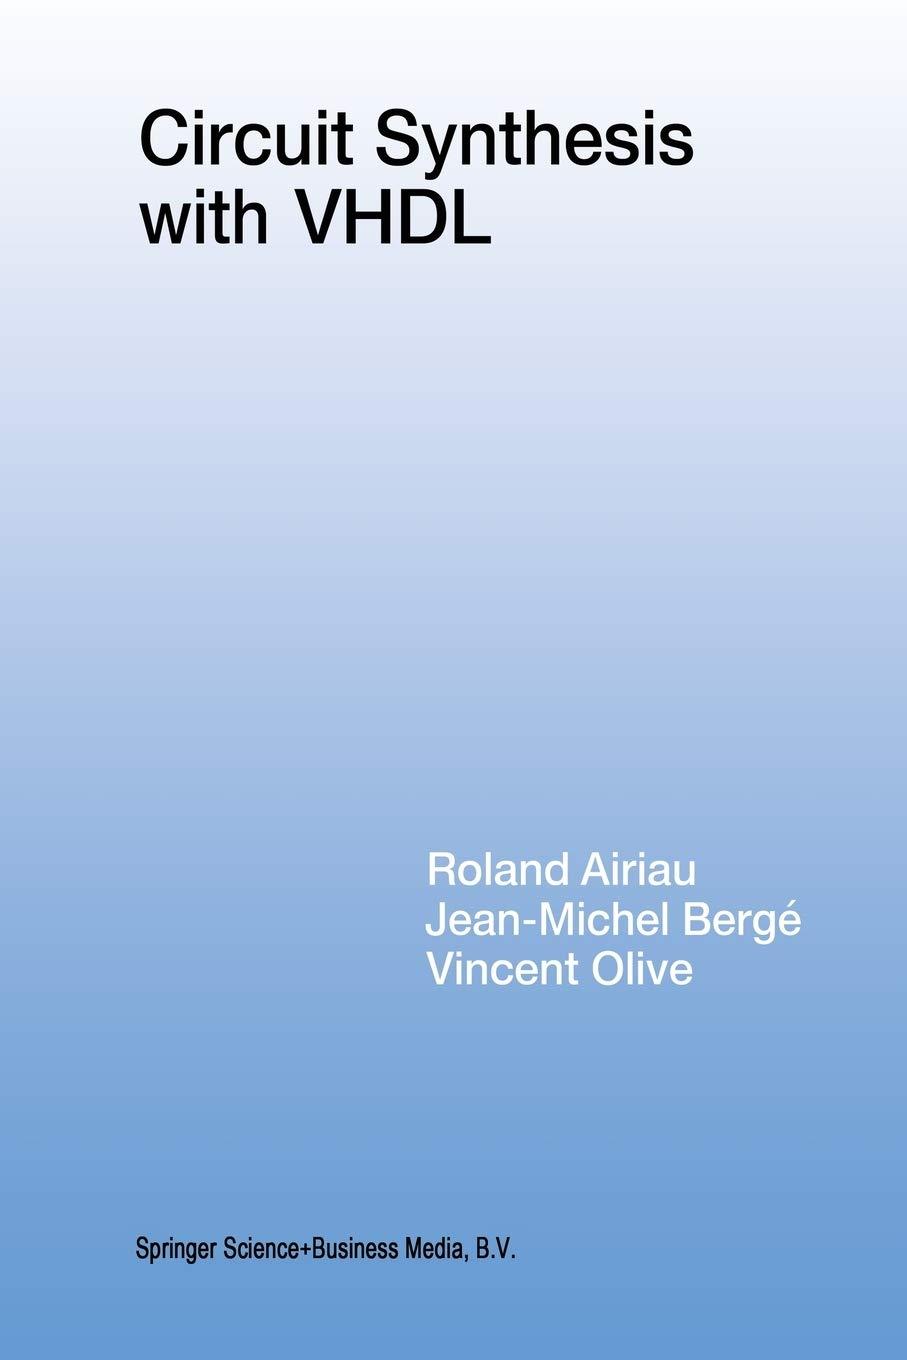 circuit synthesis with vhdl 1994 edition roland airiau, jean-michel bergé, vincent olive 1461361915,